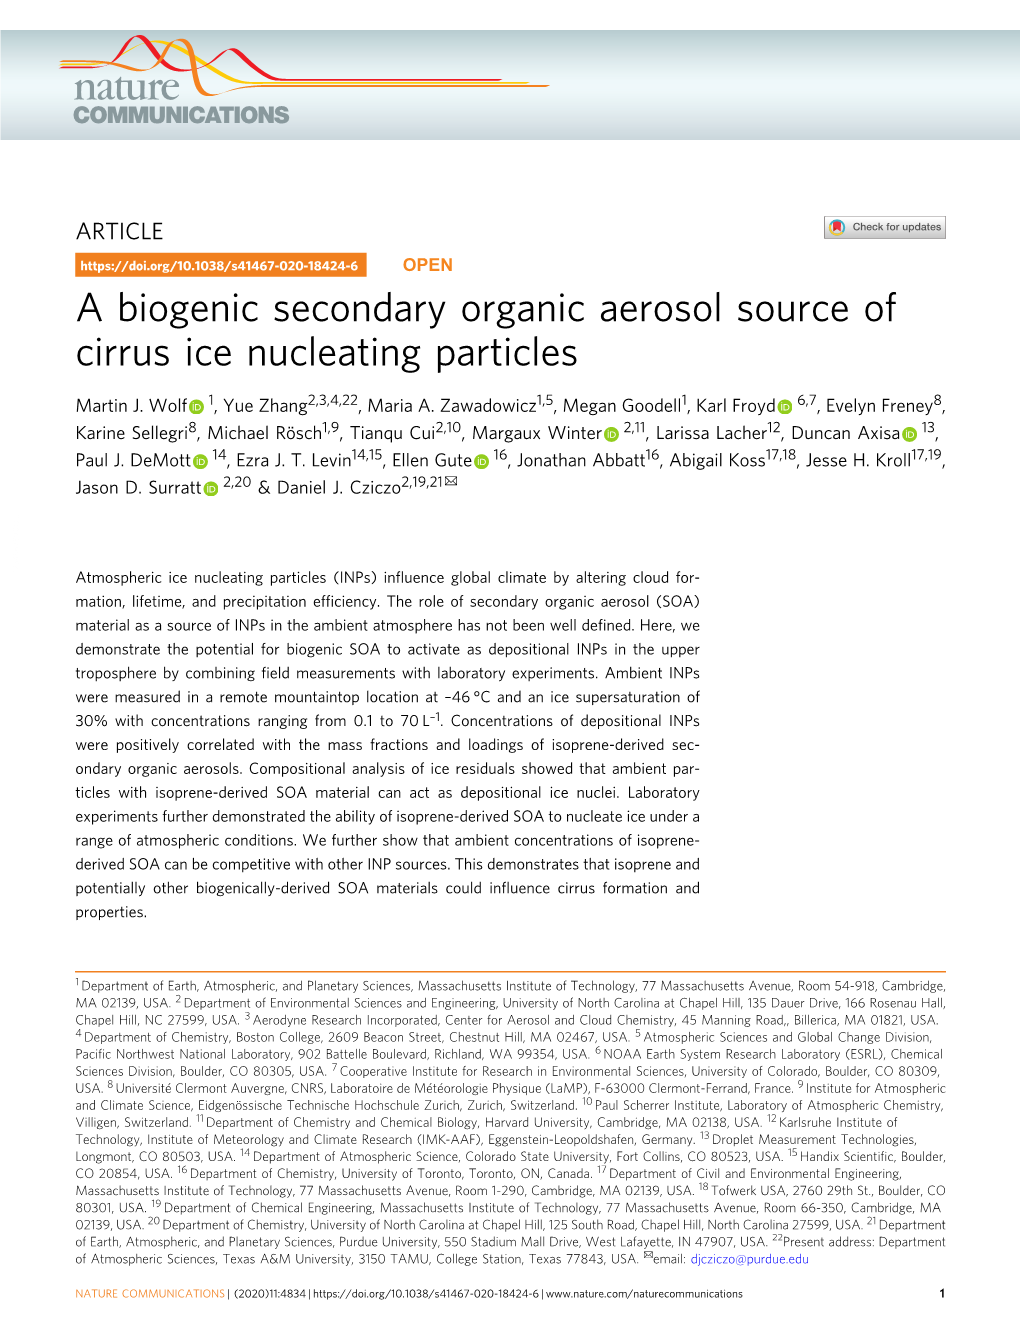 A Biogenic Secondary Organic Aerosol Source of Cirrus Ice Nucleating Particles